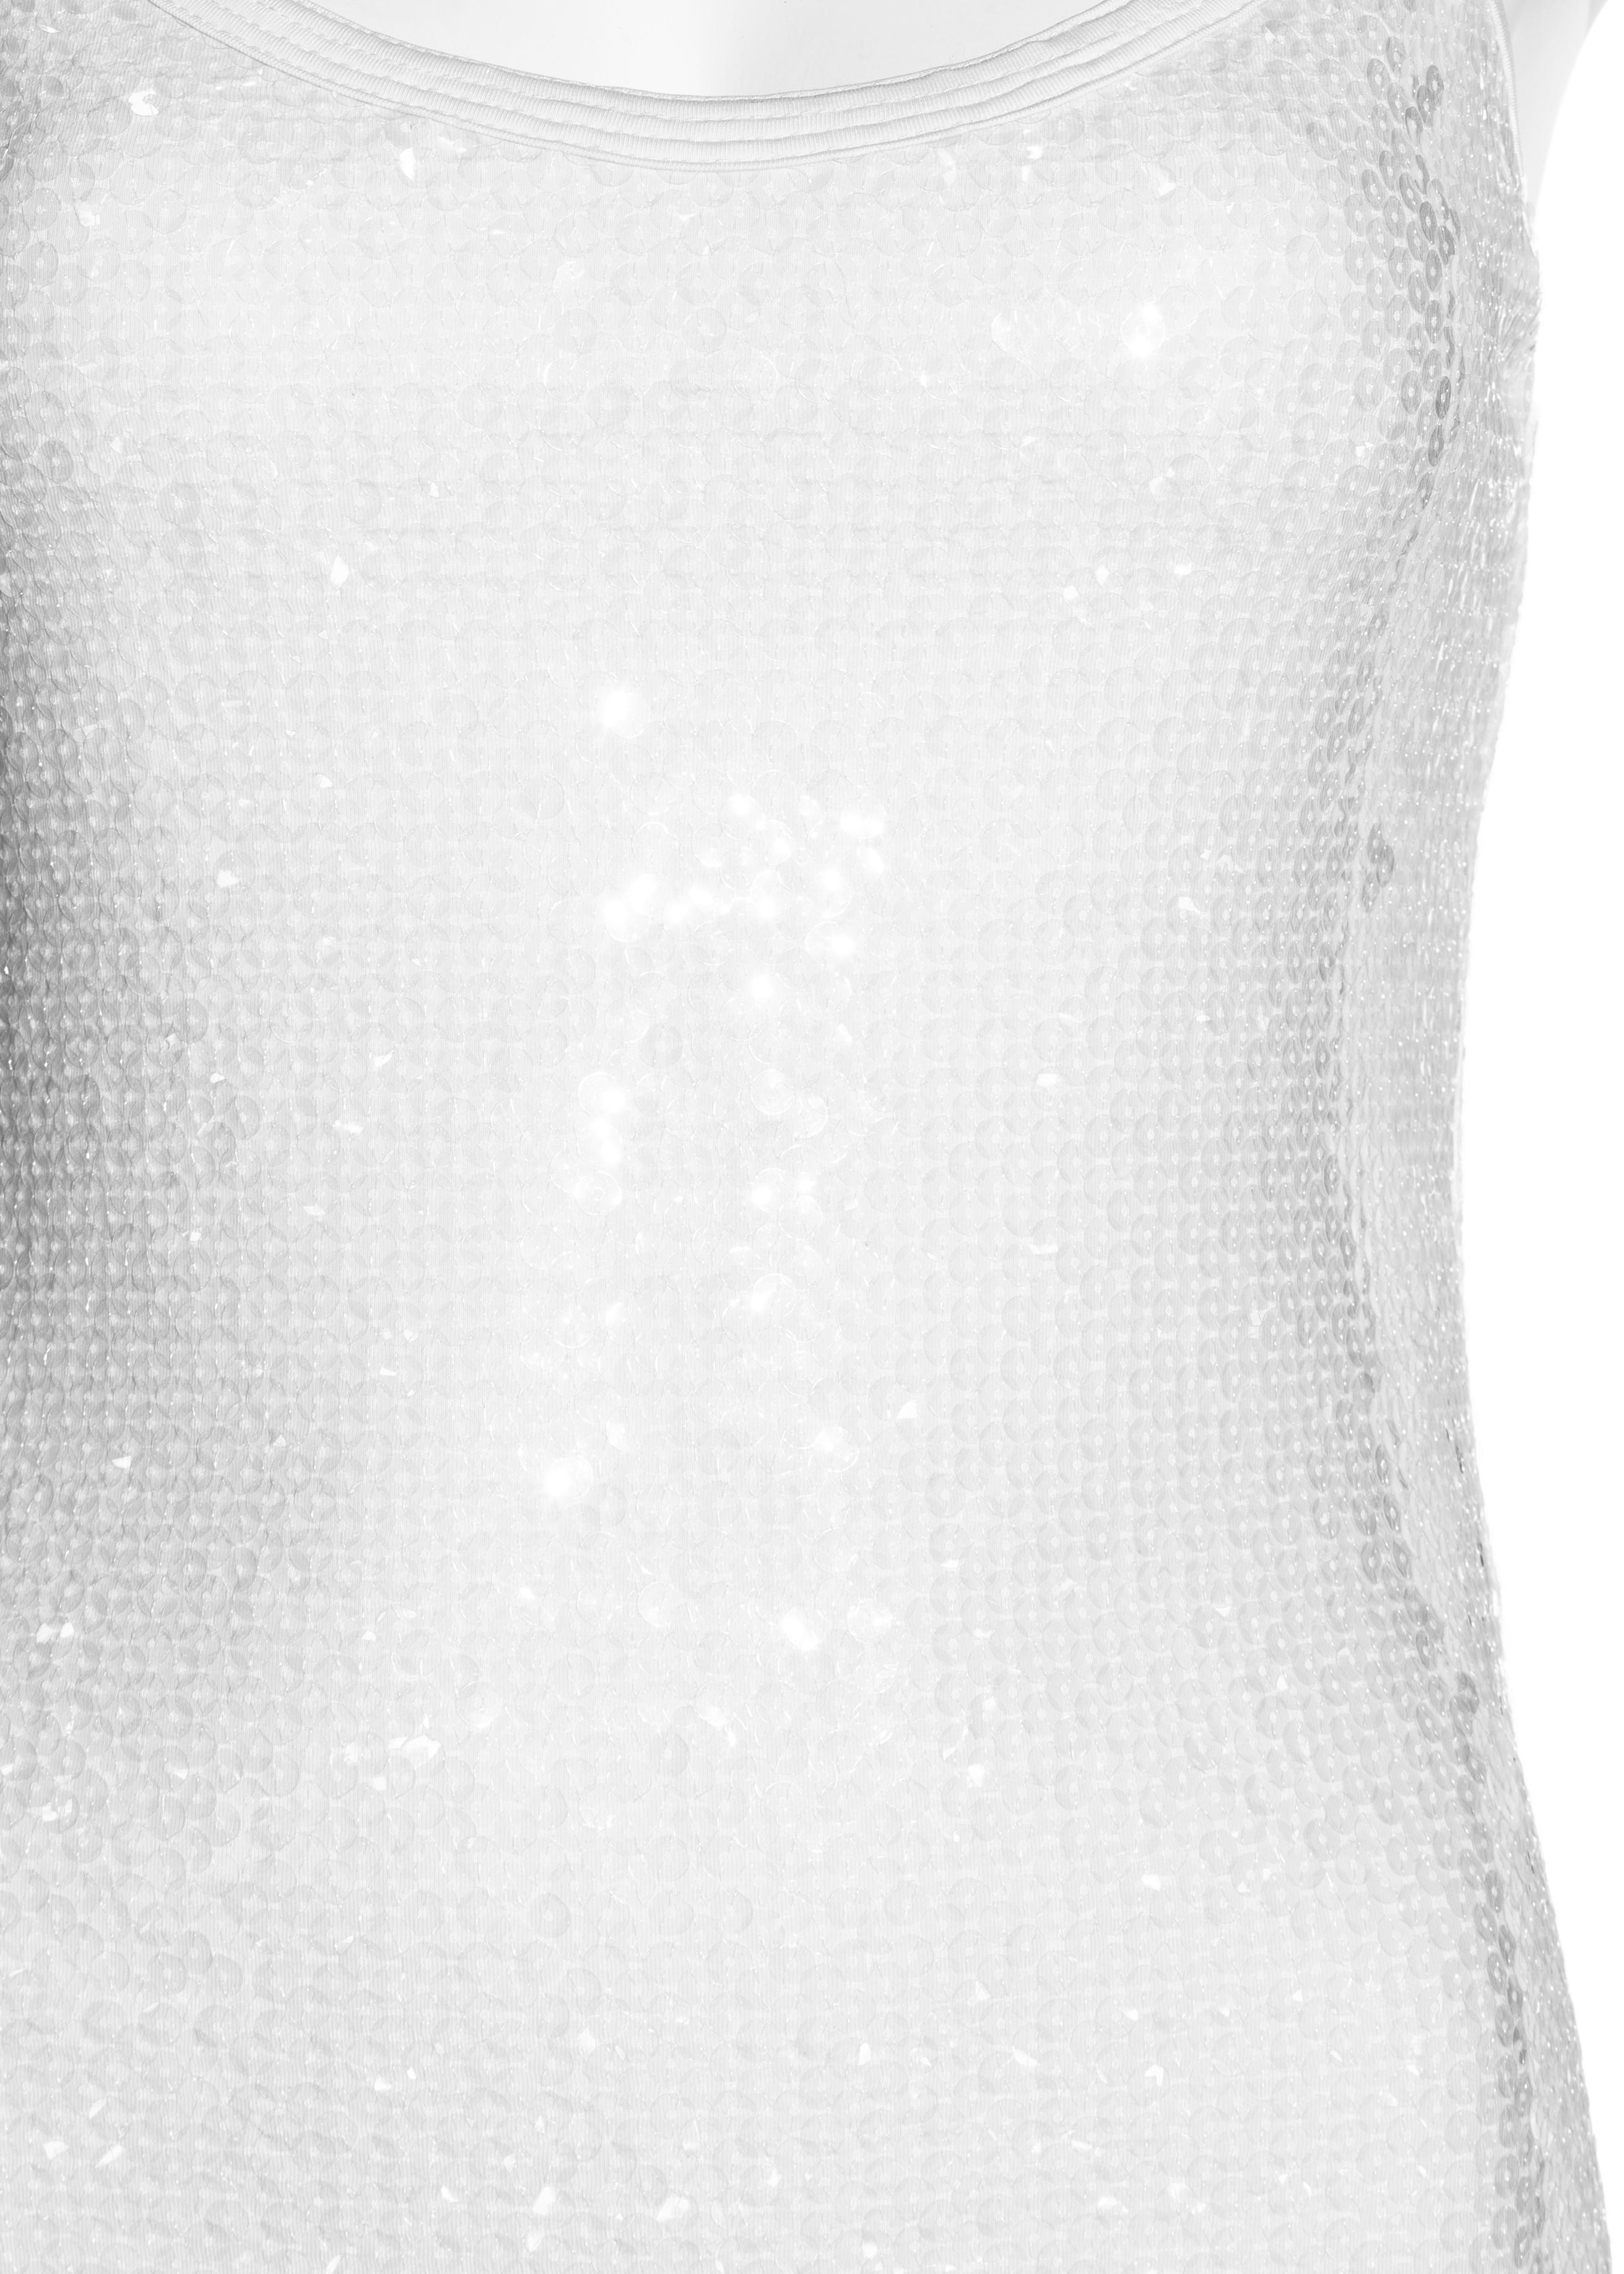 Gray Chanel by Karl Lagerfeld white clear iridescent sequin mini dress, ss 2005